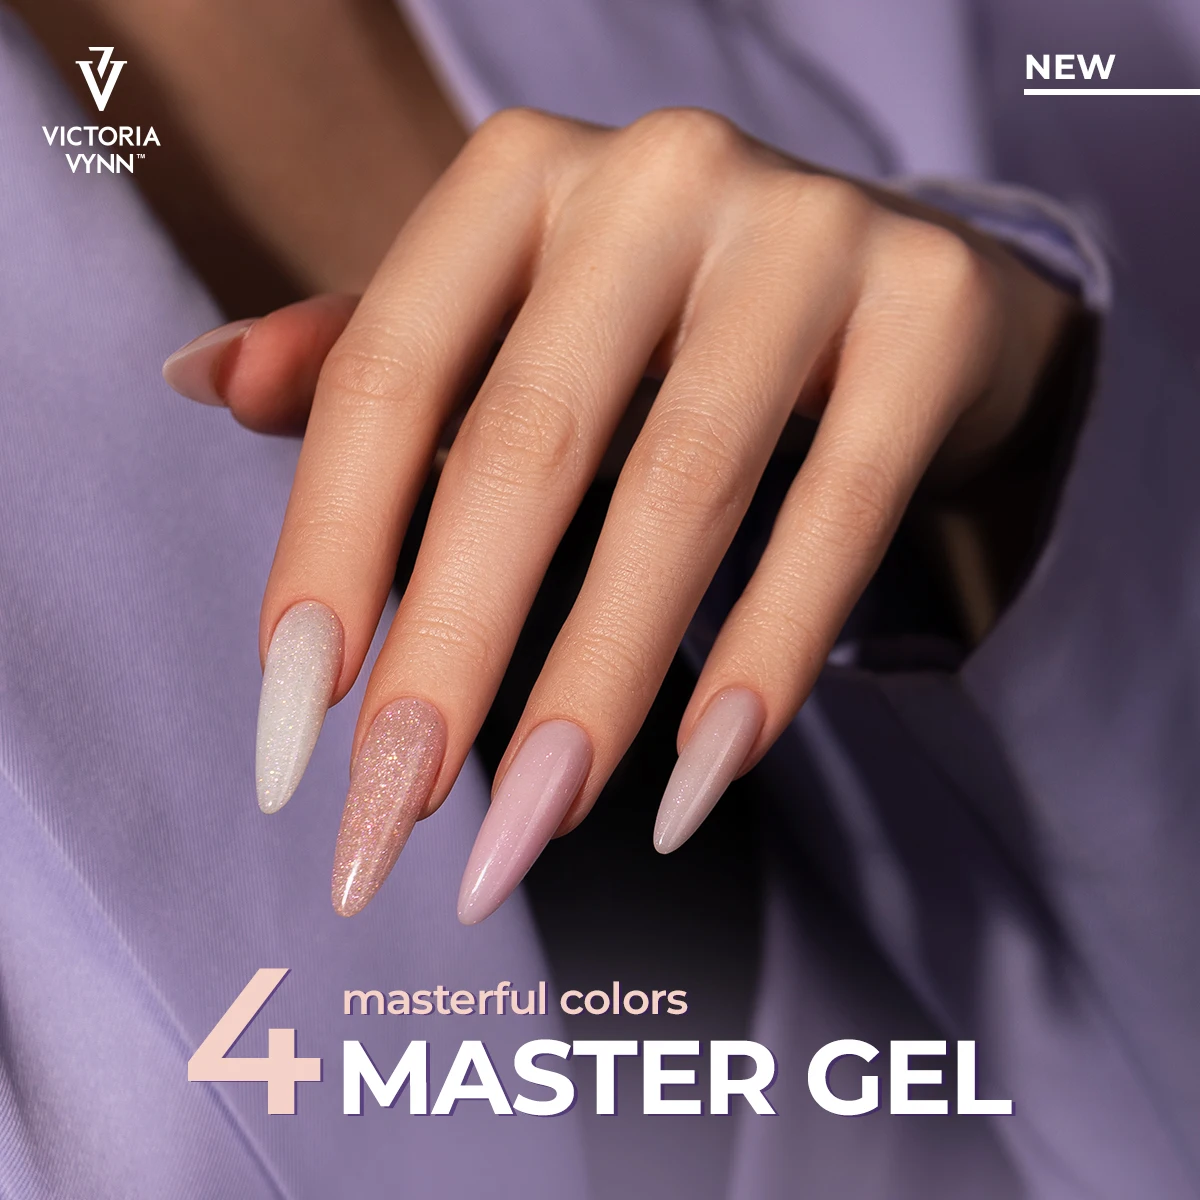 Victoria VYNN Master Gel New Colors Collection 4 Colors Glitter